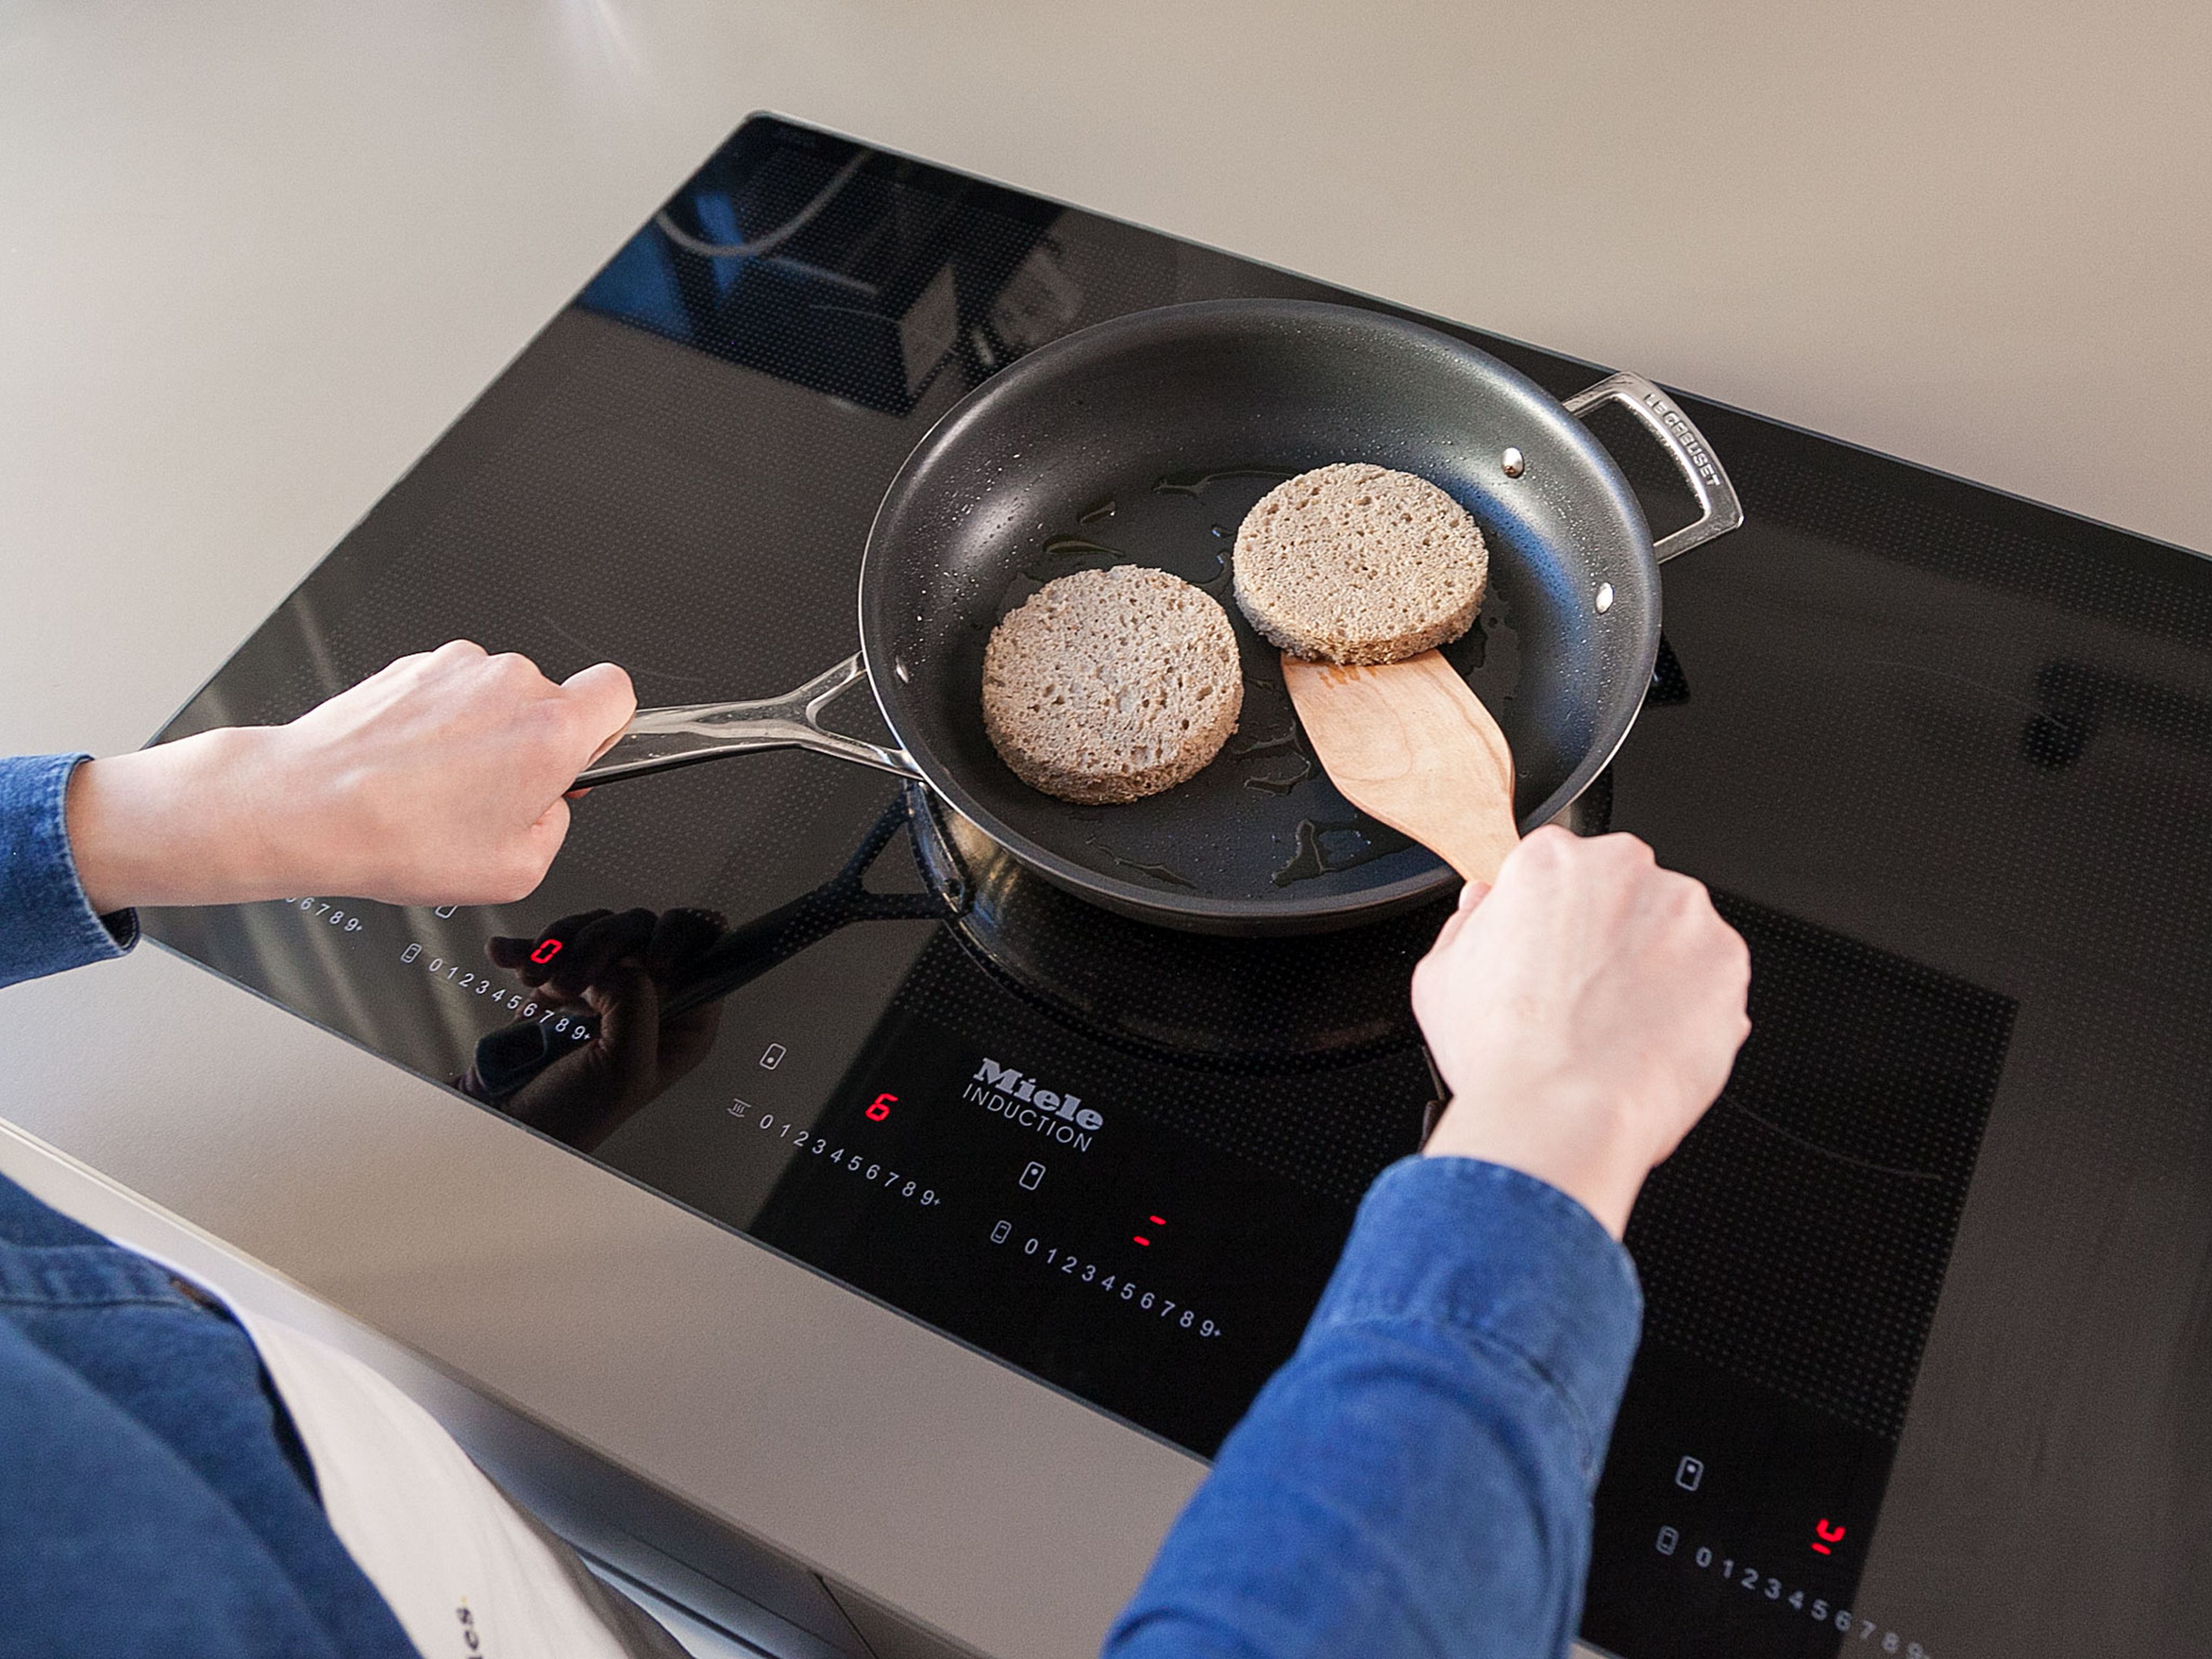 With the help of a cake ring, cut out two circles approx. the size of the burger patties from each slice of bread. They will be used as buns later. Heat oil in a frying pan over medium-high heat and toast bread on both sides for approx. 2 min., or until crisp.